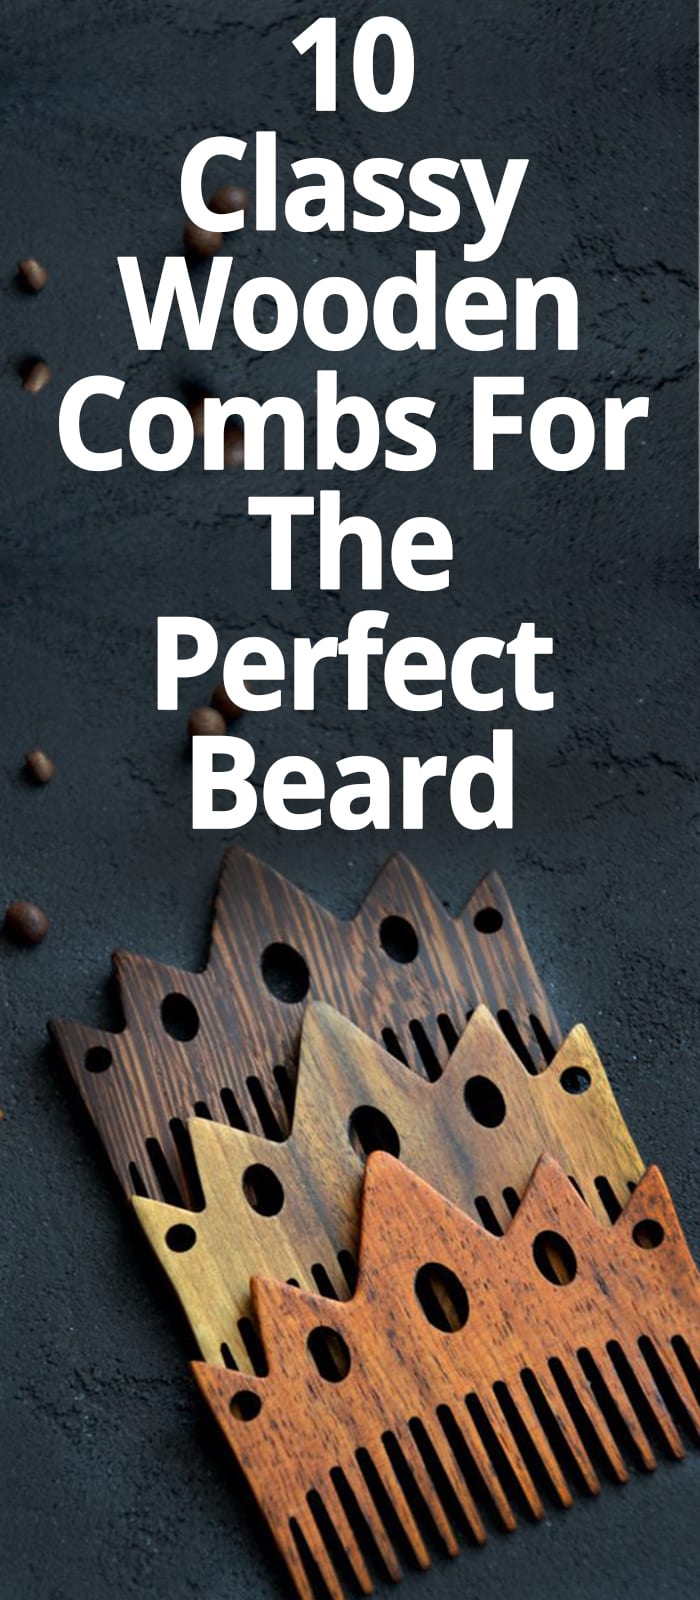 10 WOODEN COMBS FOR THE PERFECT BEARD